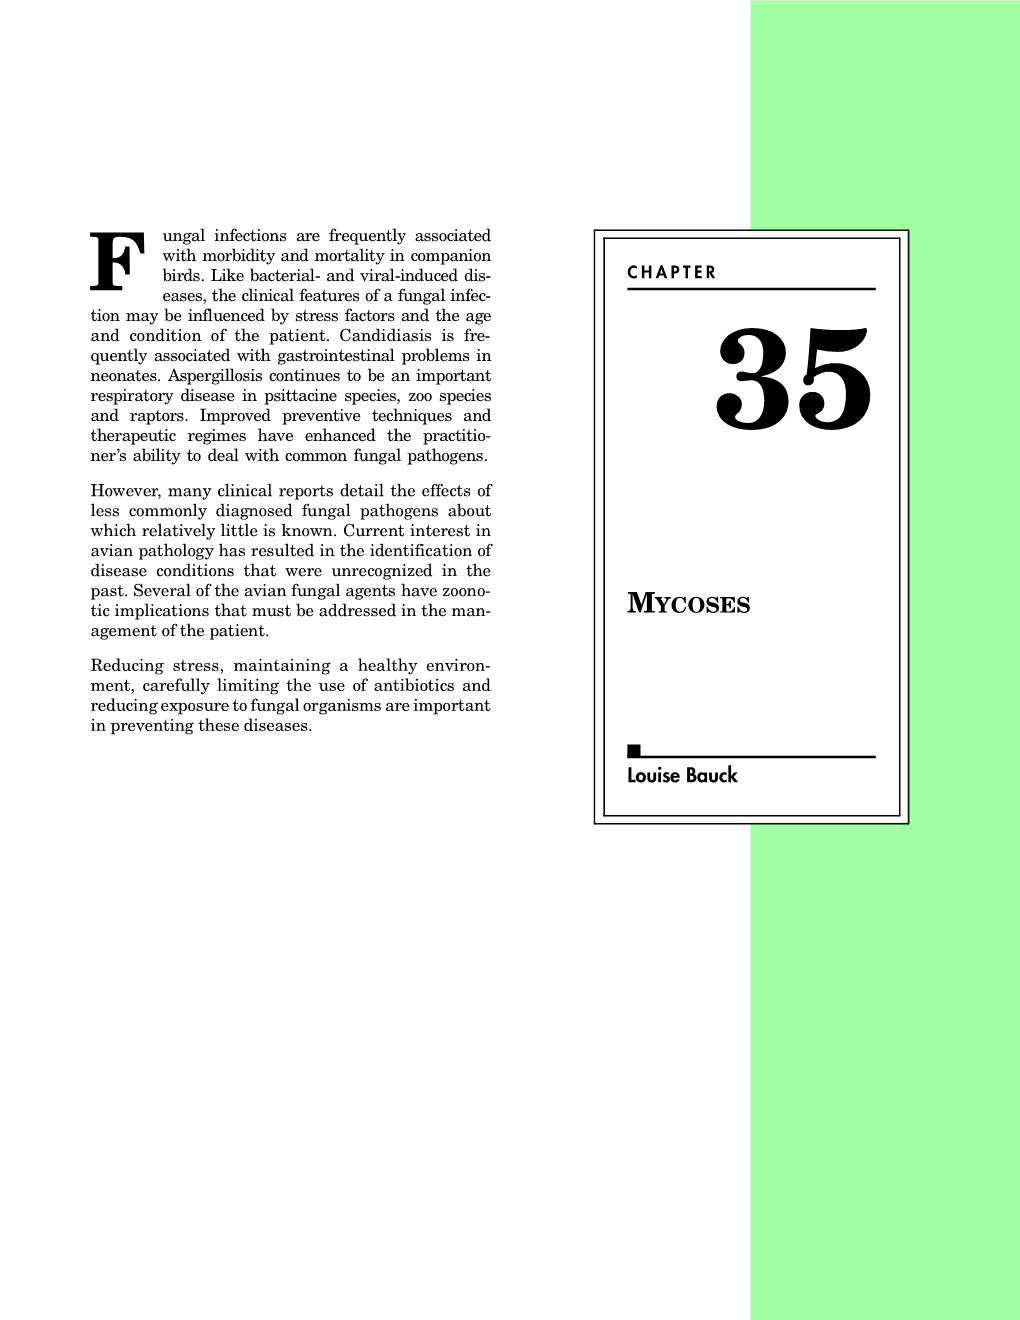 Chapter 35: Mycoses